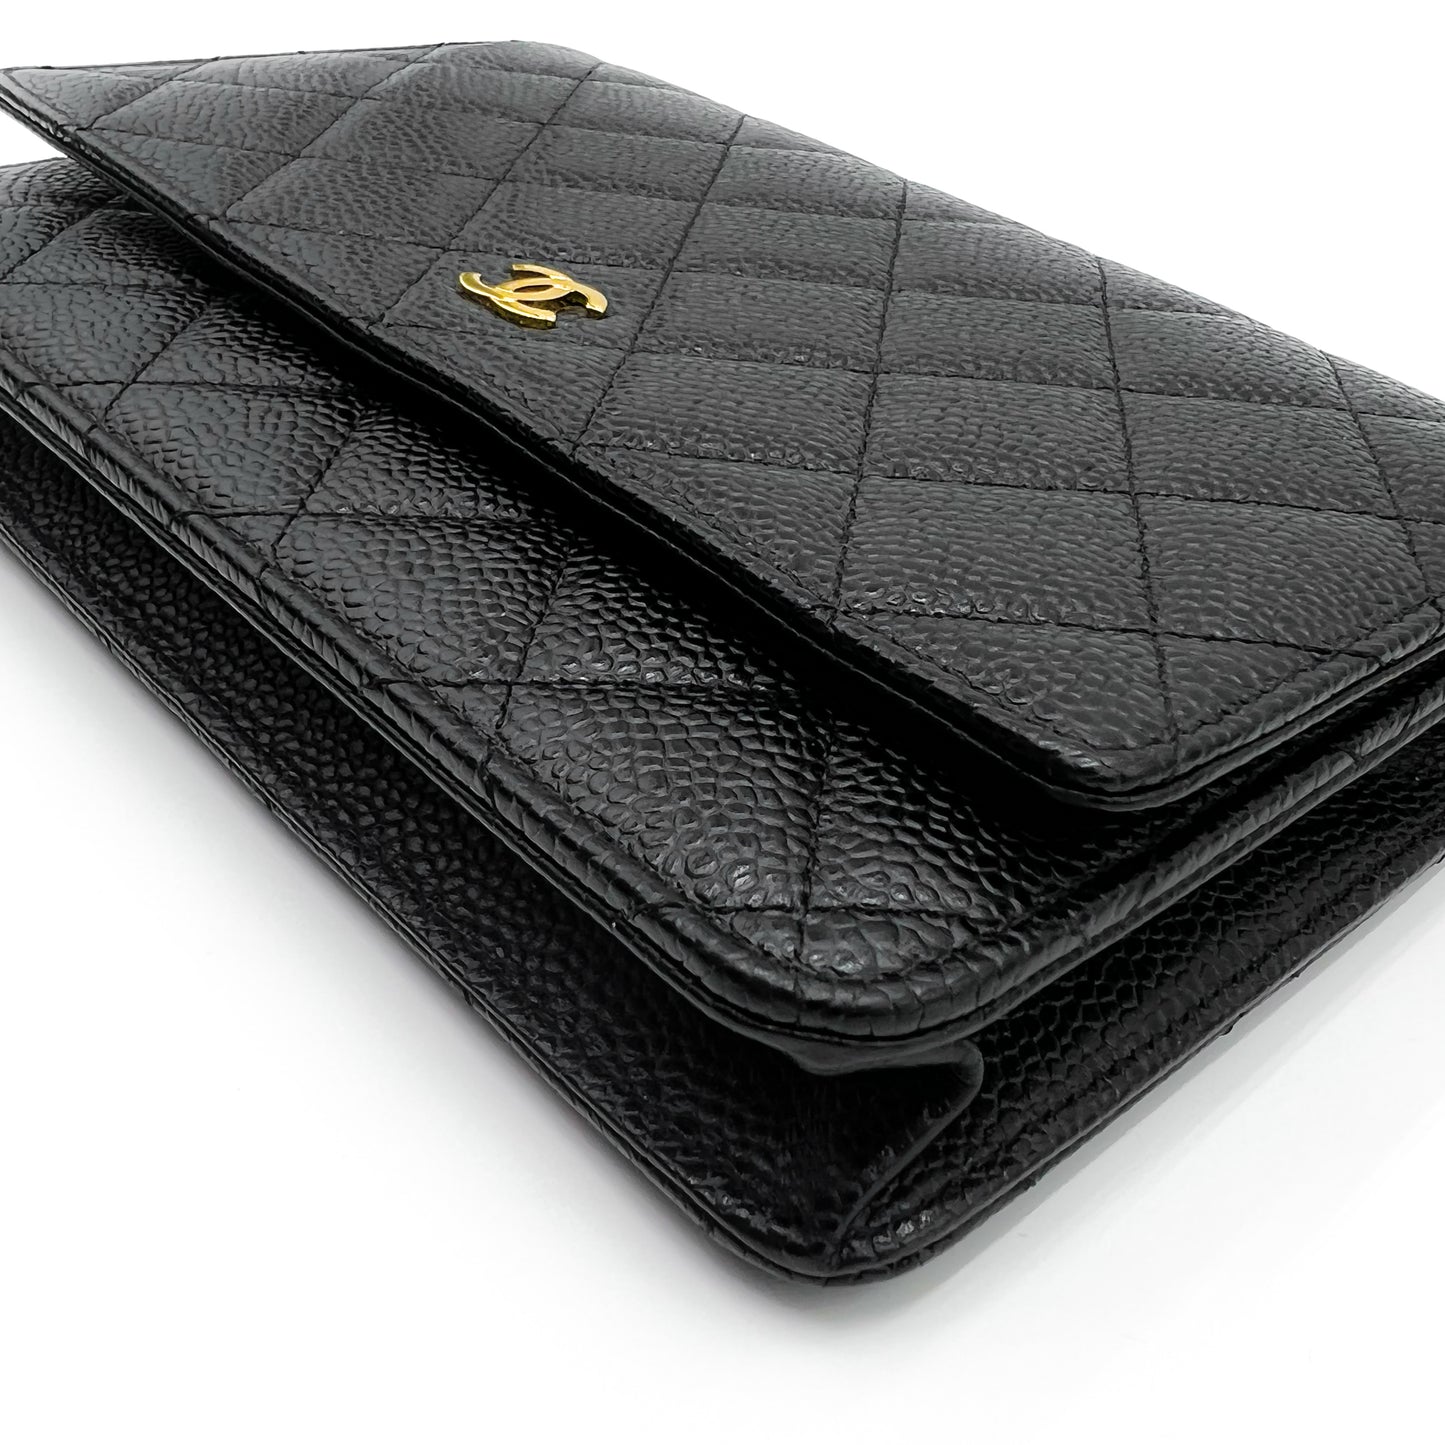 Chanel Black Wallet on Chain with Gold Hardware